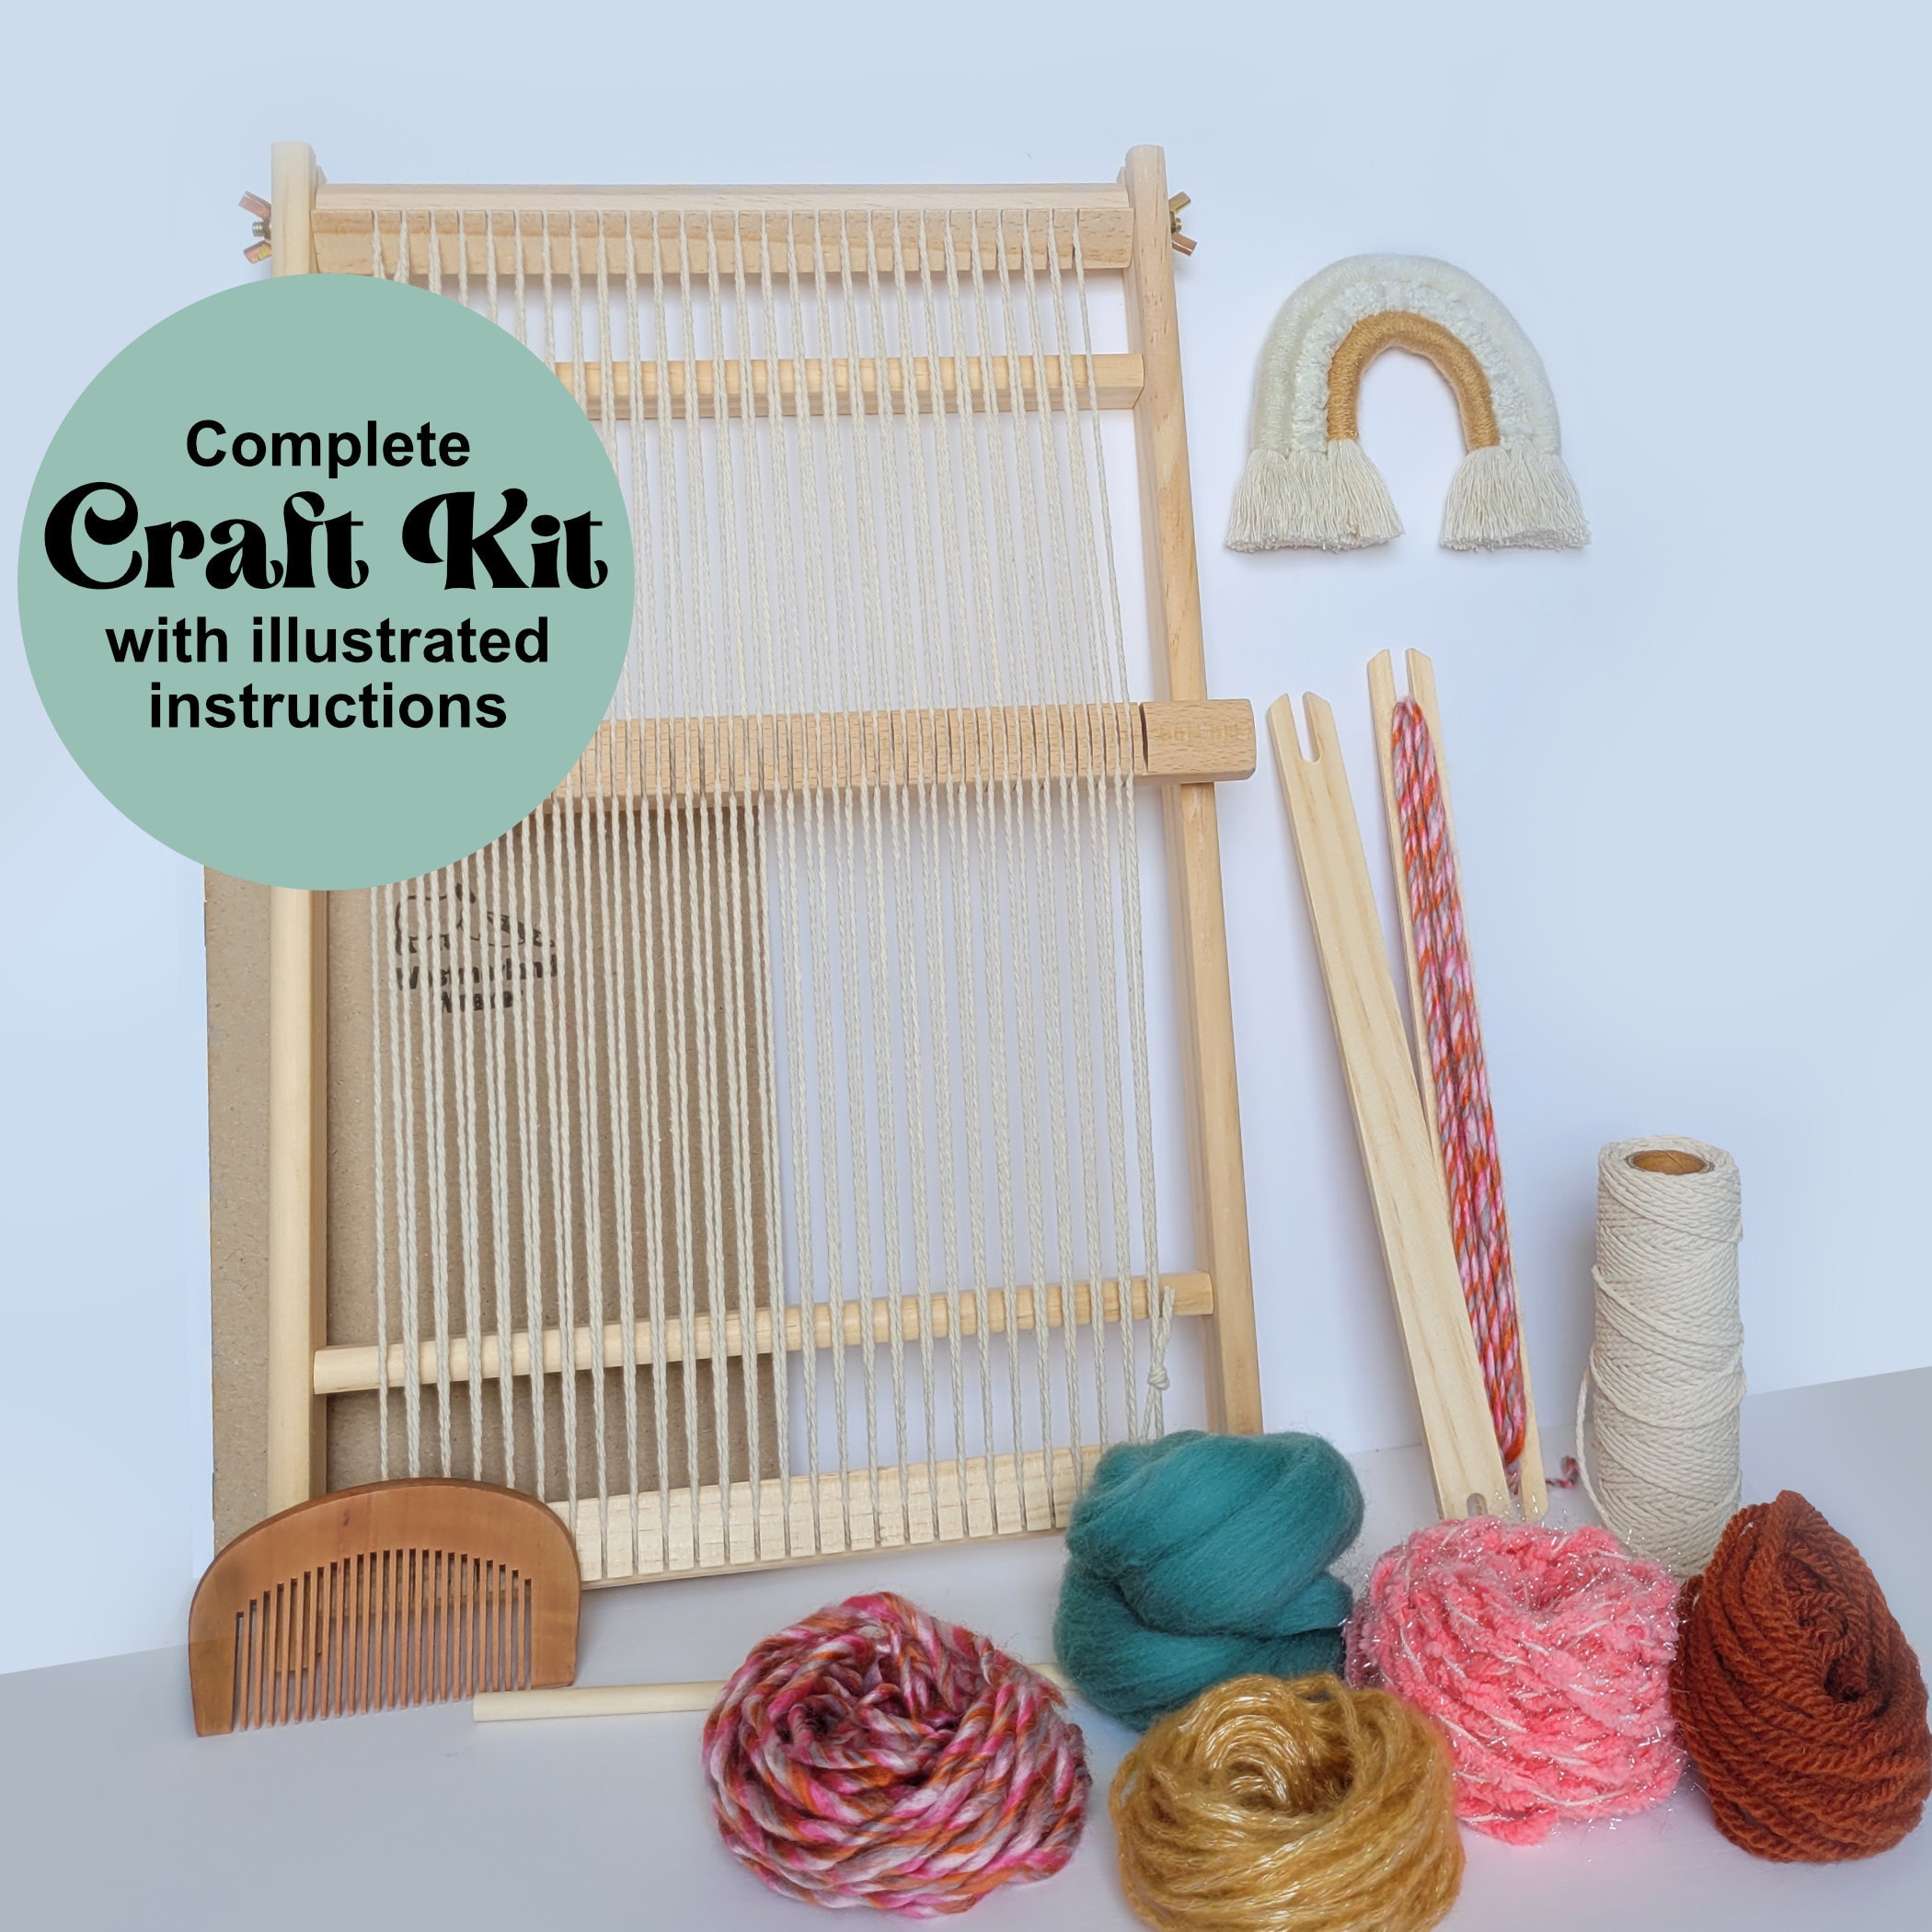 Knituk Long Knitting Loom Set of 4. Extra-pegs Included. 